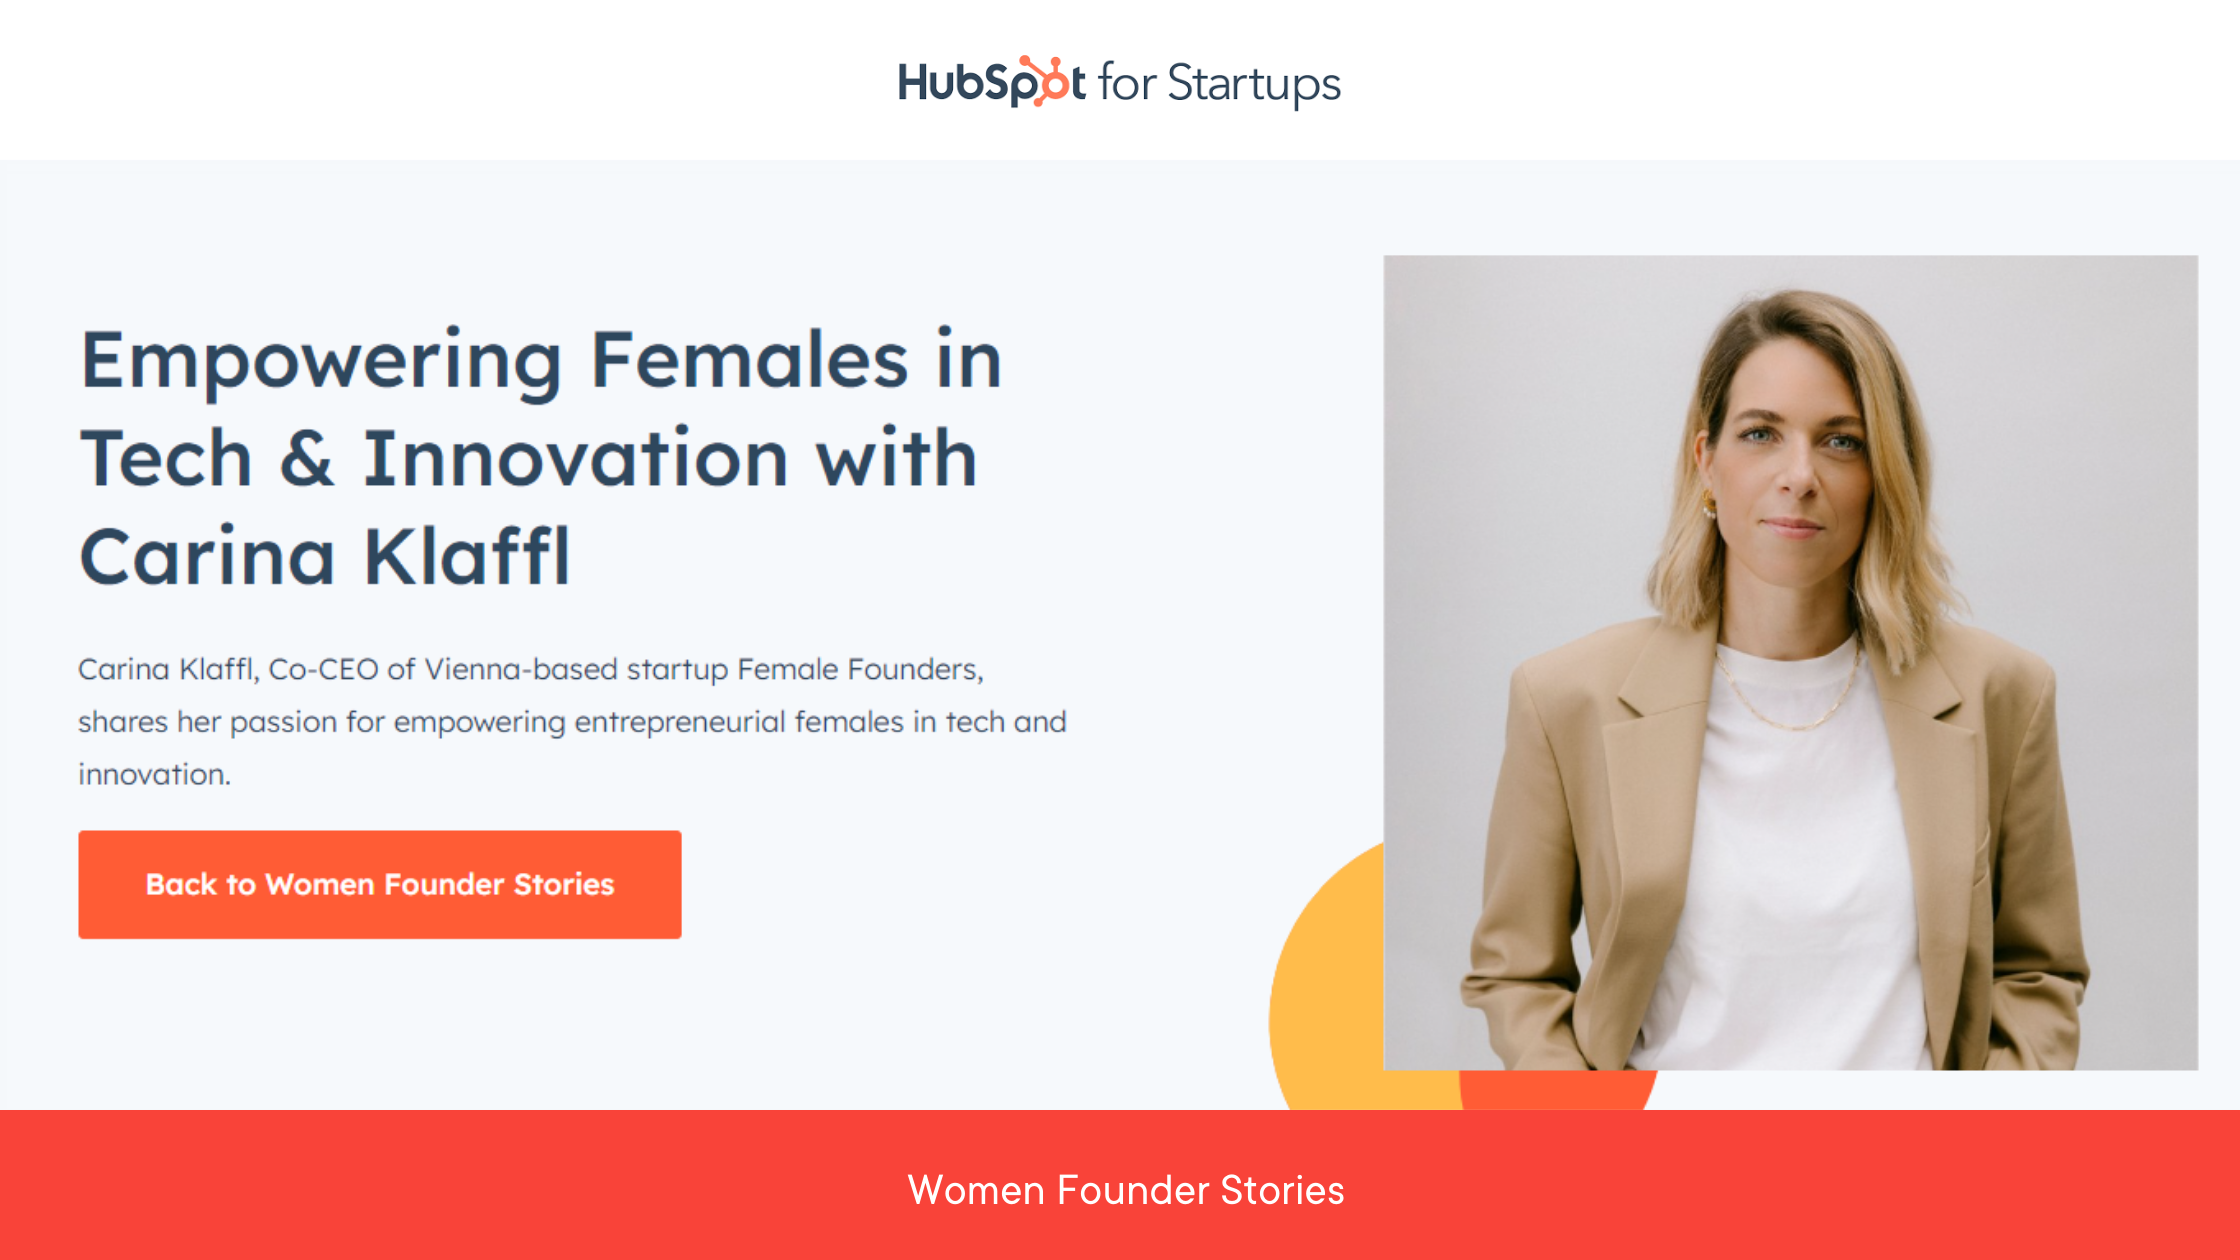 Empowering Females in Tech & Innovation with Carina Klaffl - Hubspot for Startups